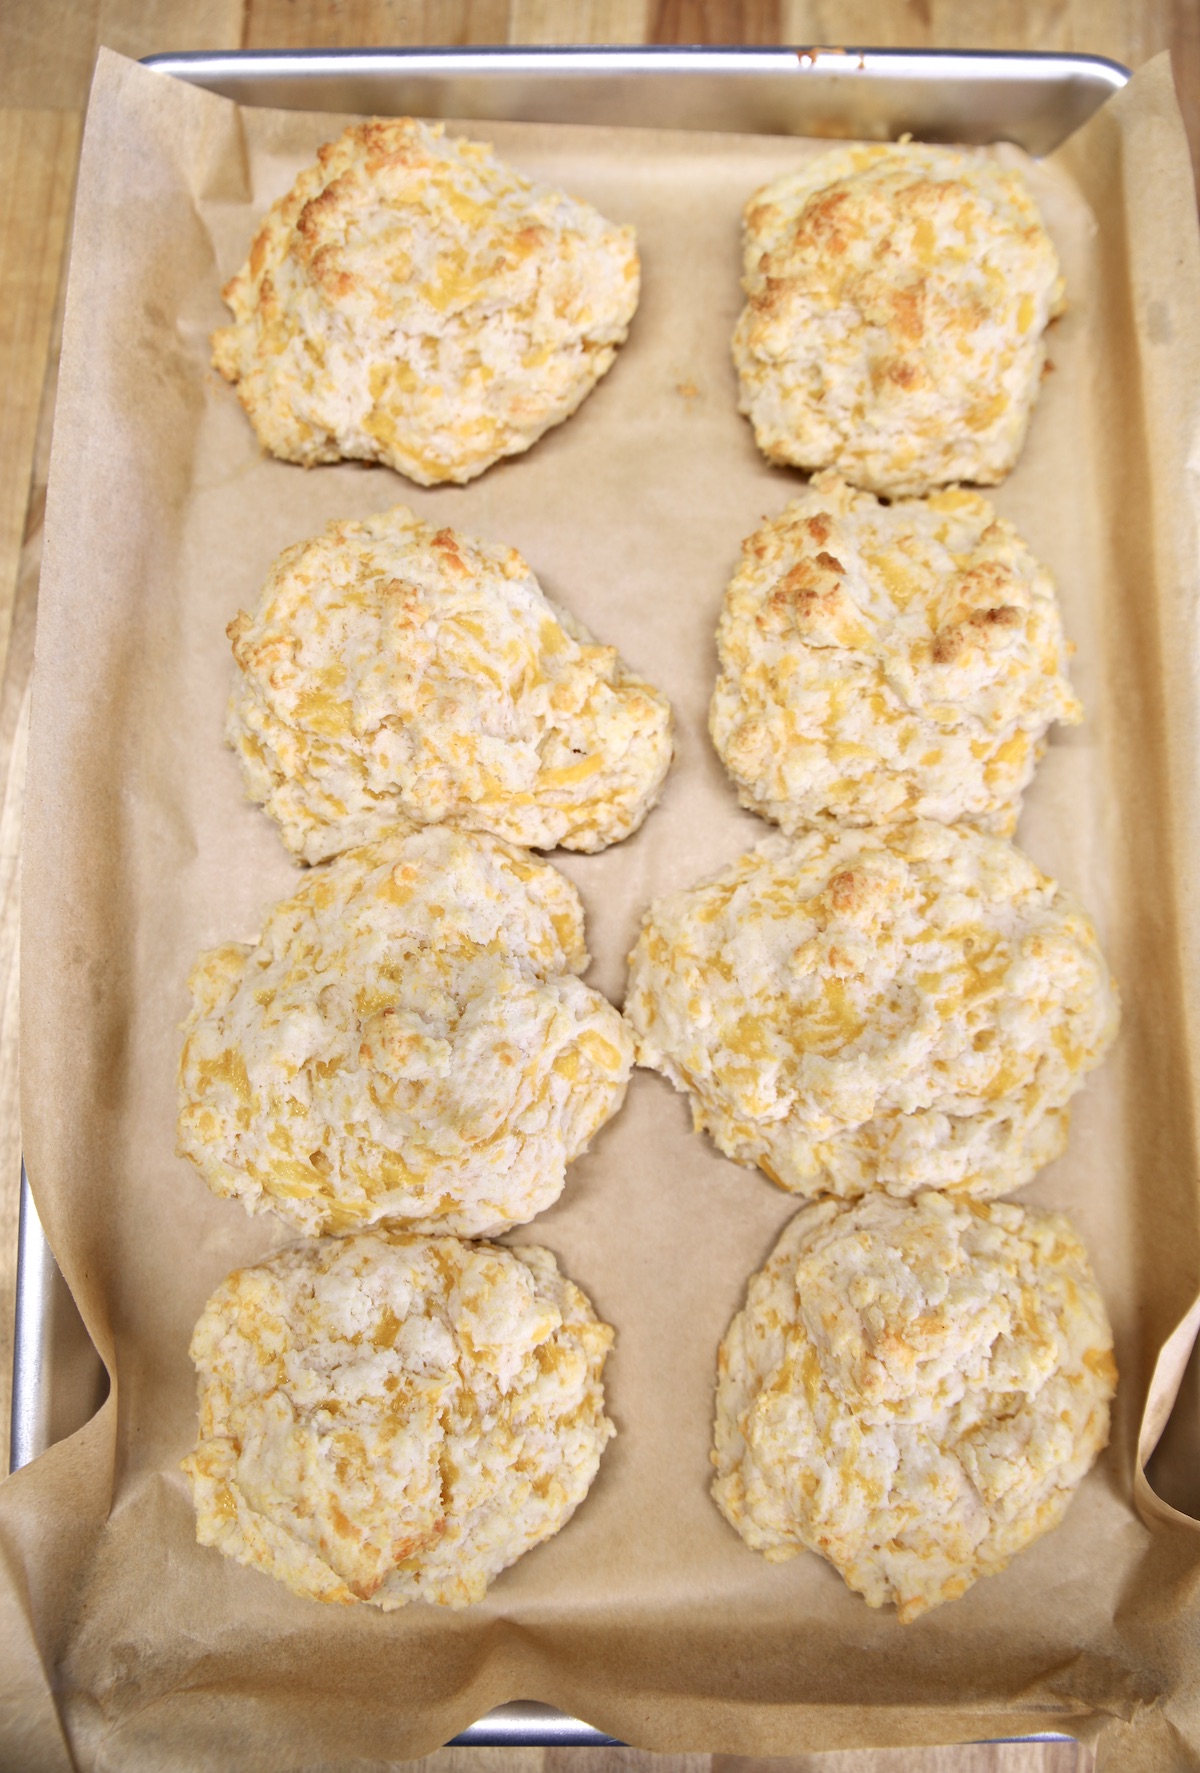 Baked cheddar biscuits on a sheet pan.